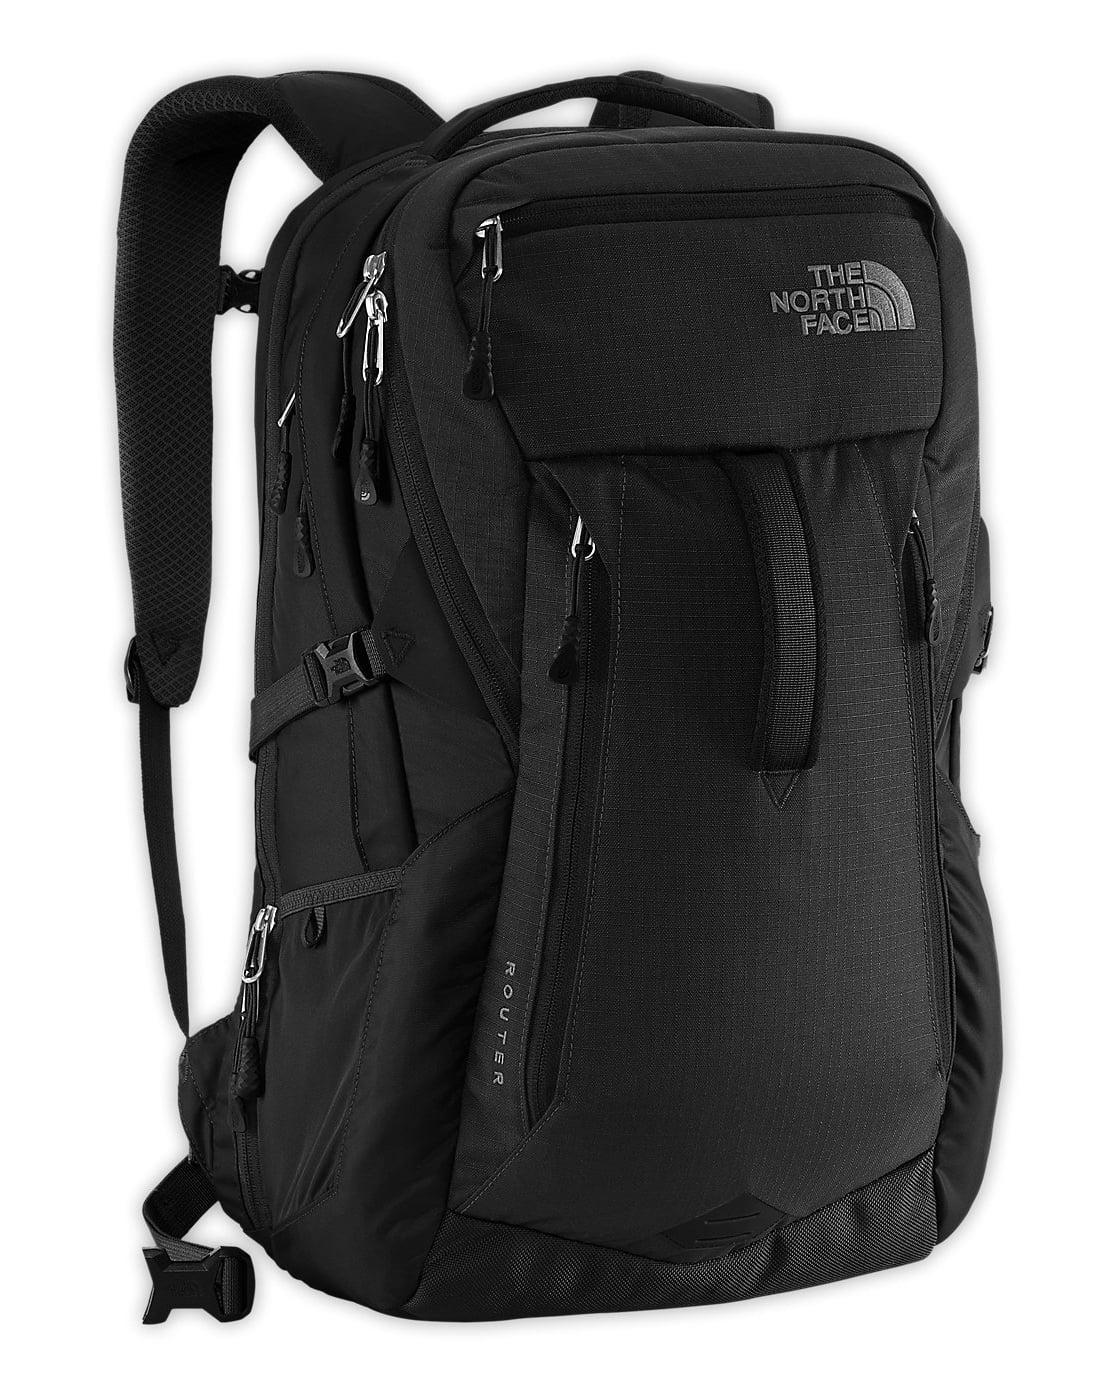 The North Face Router Backpack Walmart.com